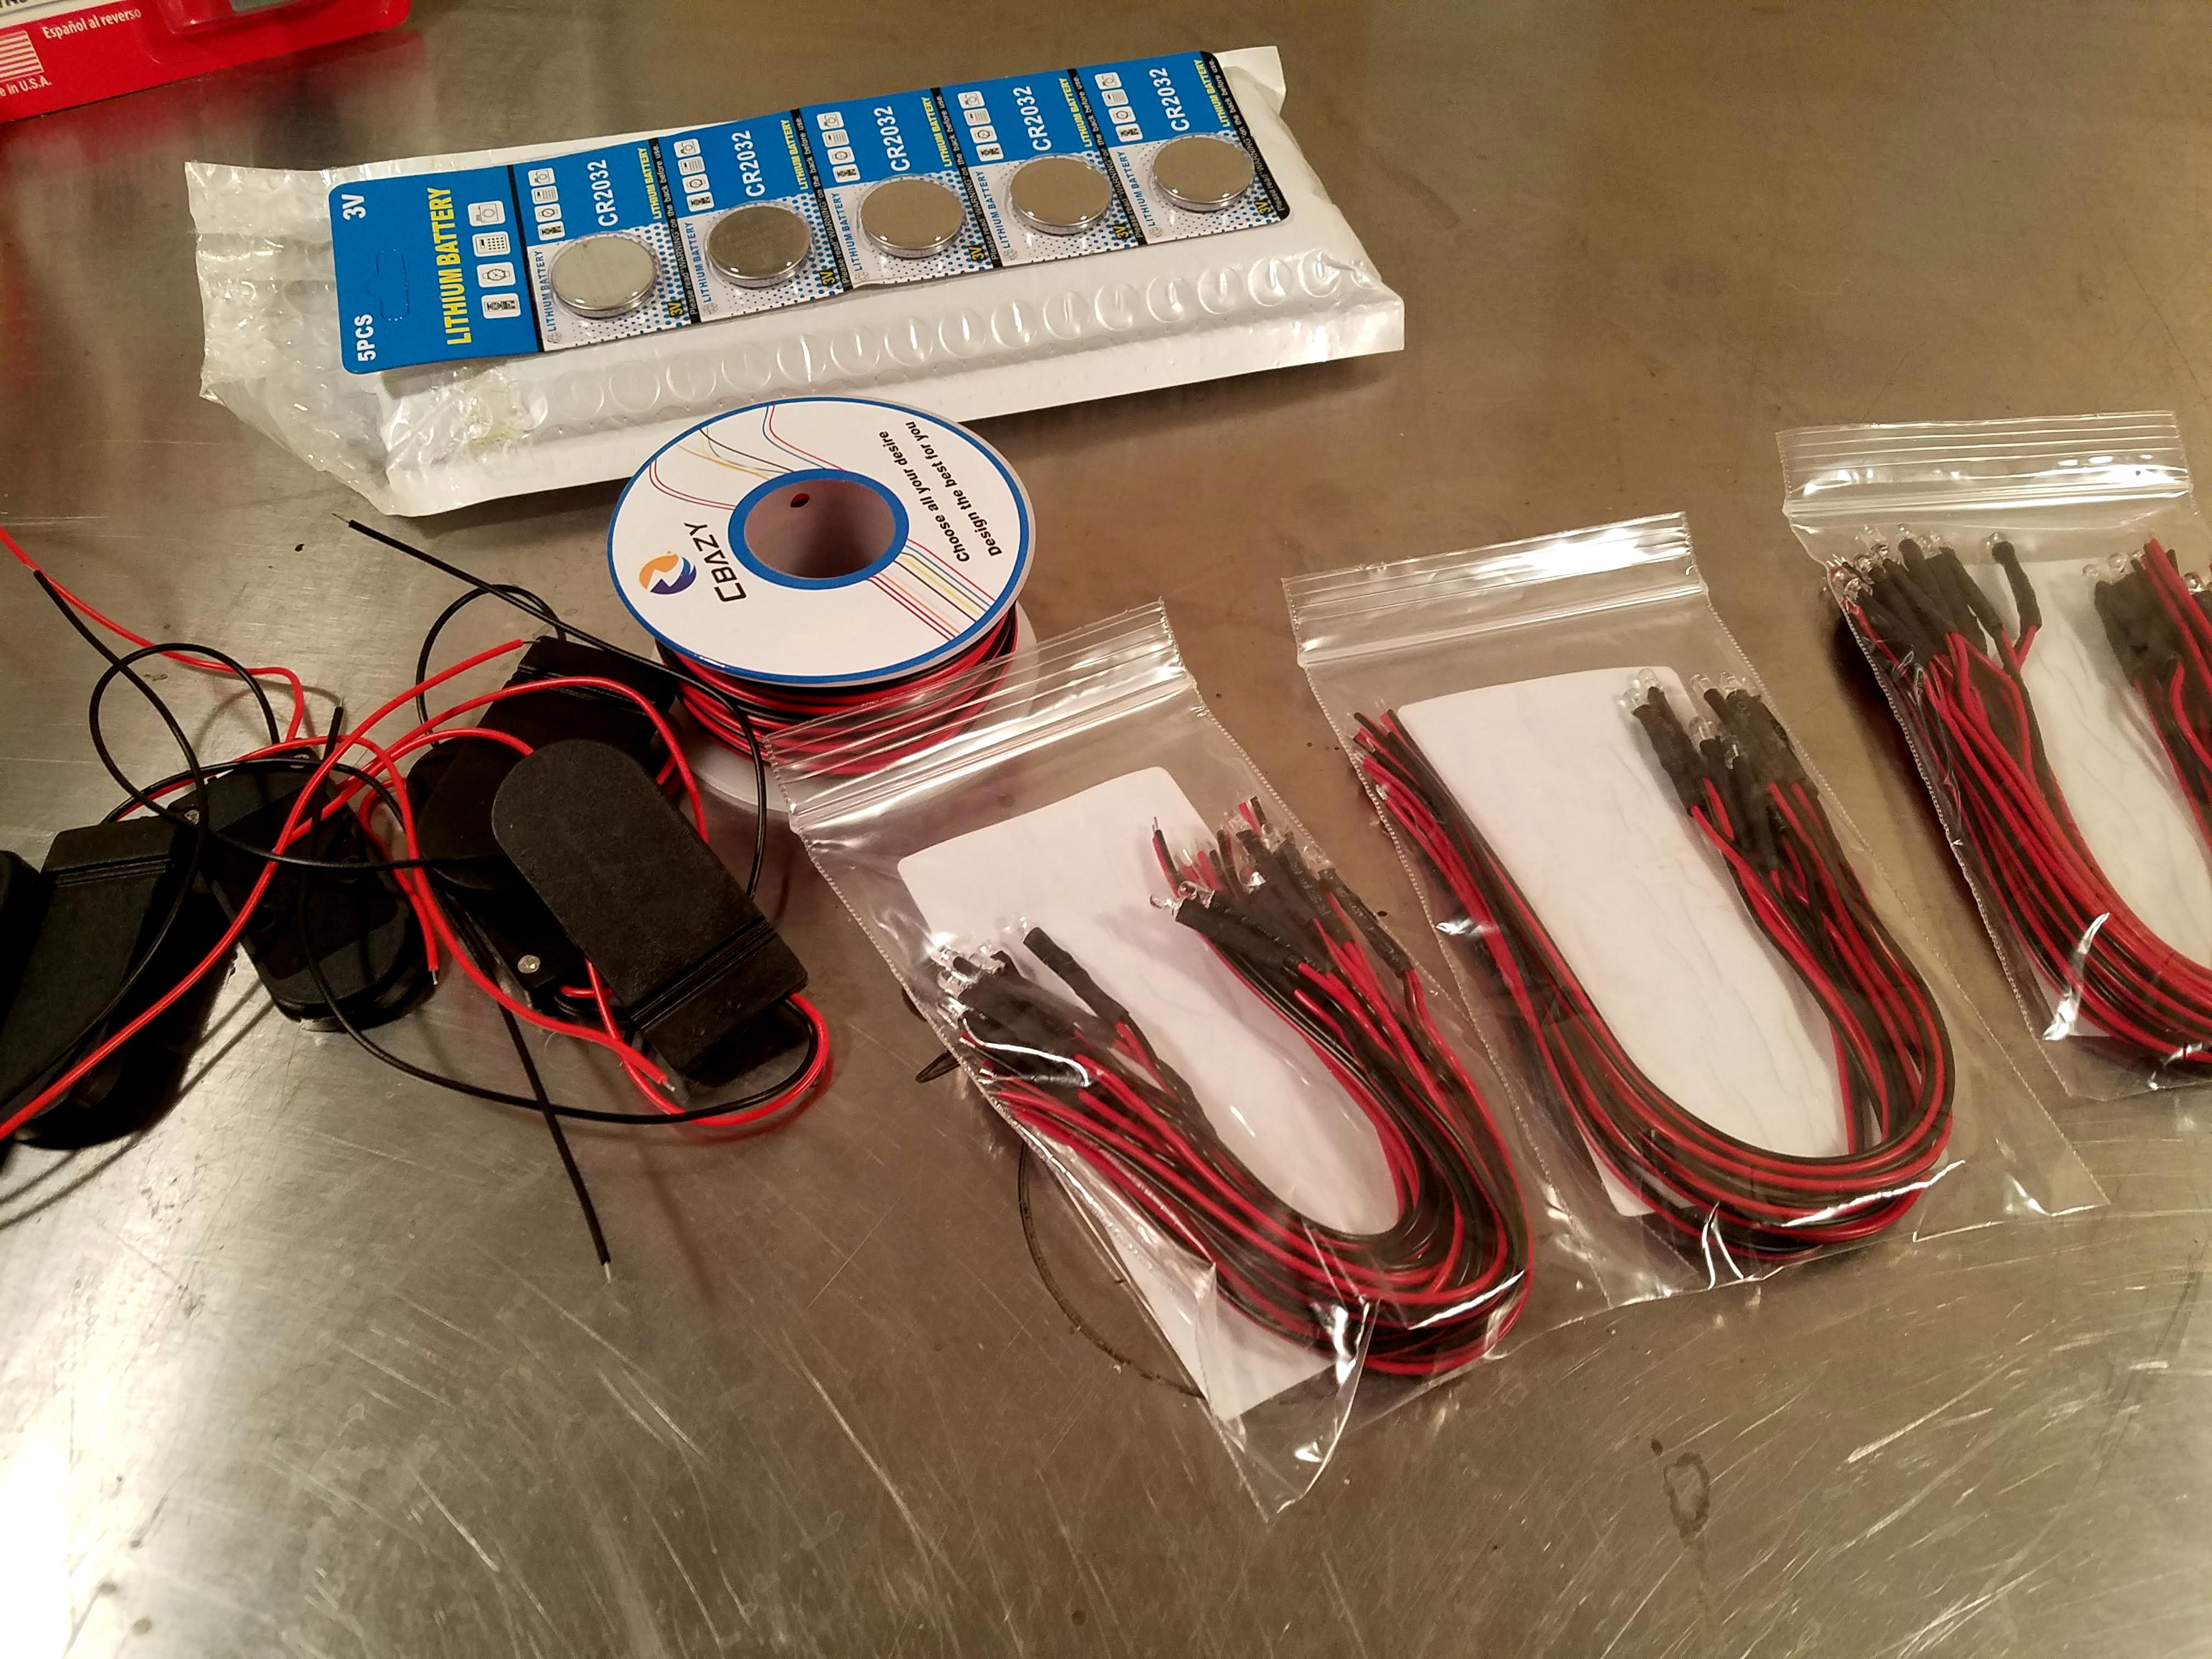 Prewired LEDs in three colors, coin cell batteries, housings, and wire. 